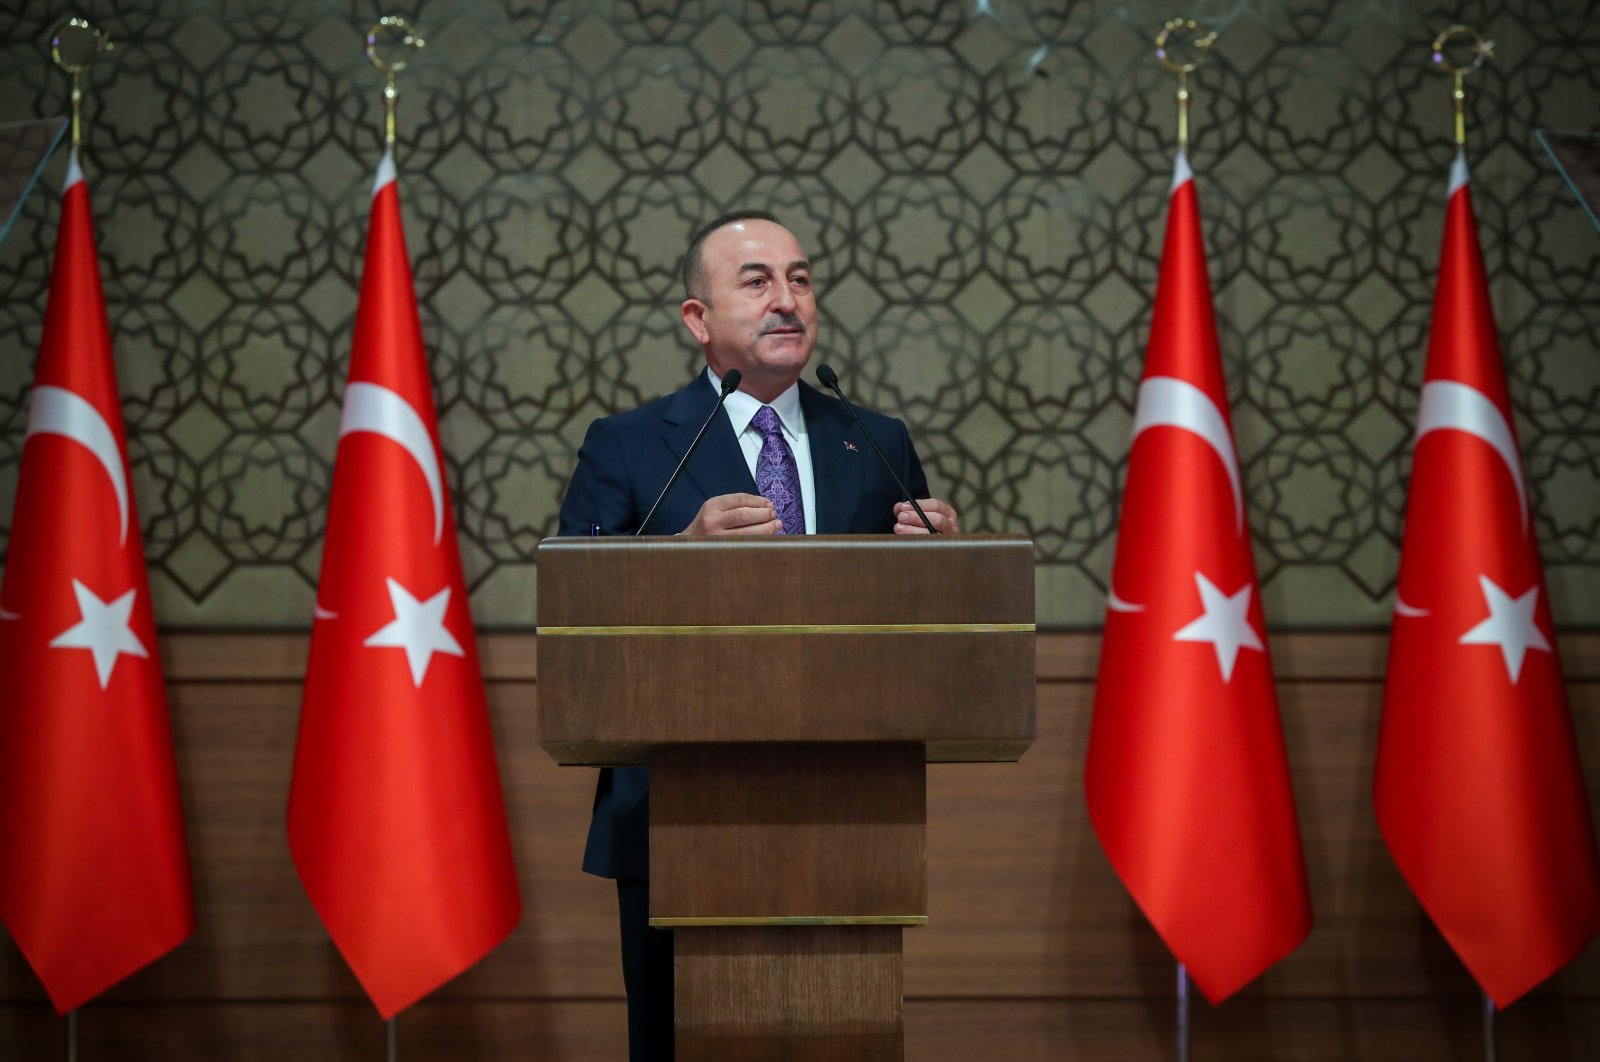 Foreign Minister Mevlüt Çavuşoğlu speaks at the 12th Ambassadors Conference at the Presidential Complex in Ankara, Turkey, Nov. 10, 2020. (AA Photo)